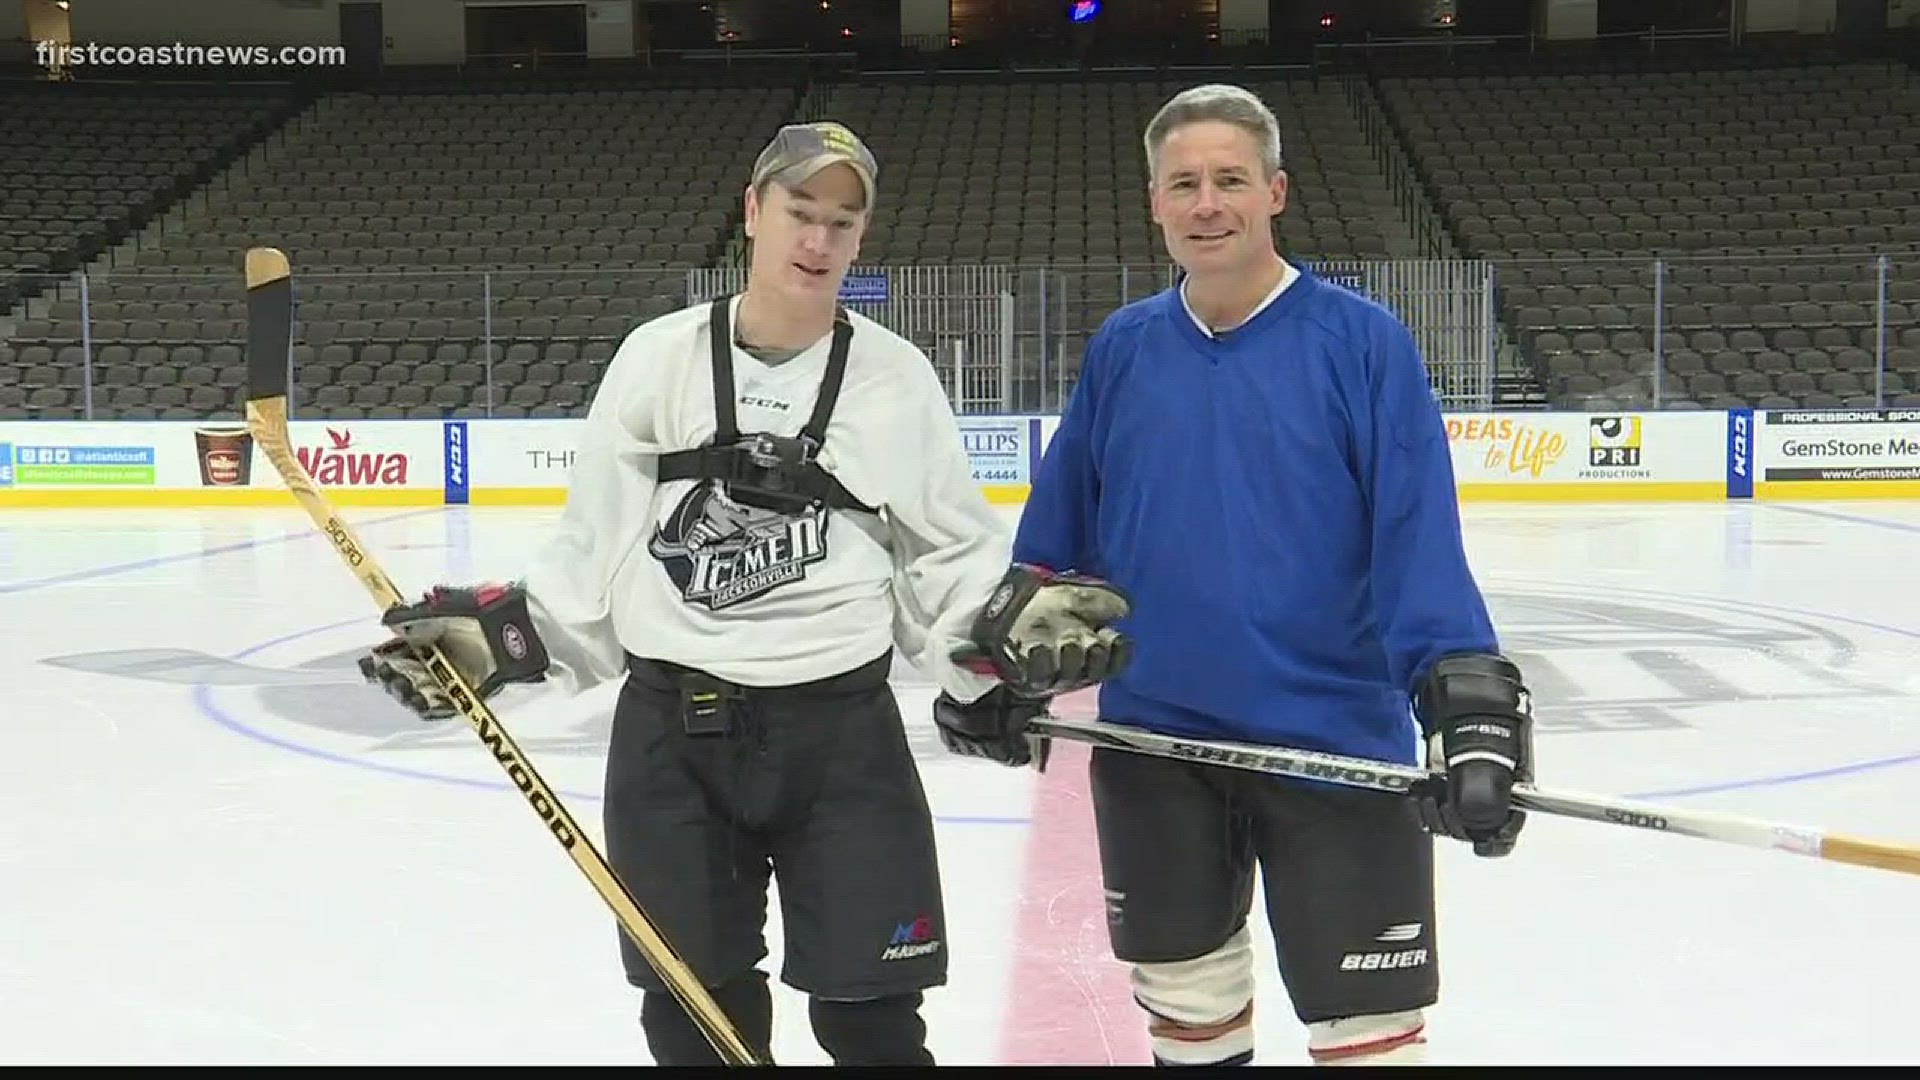 FCN reporters Nick Perreault and Jeff Valin take to the hockey rink for a lesson in the sport.